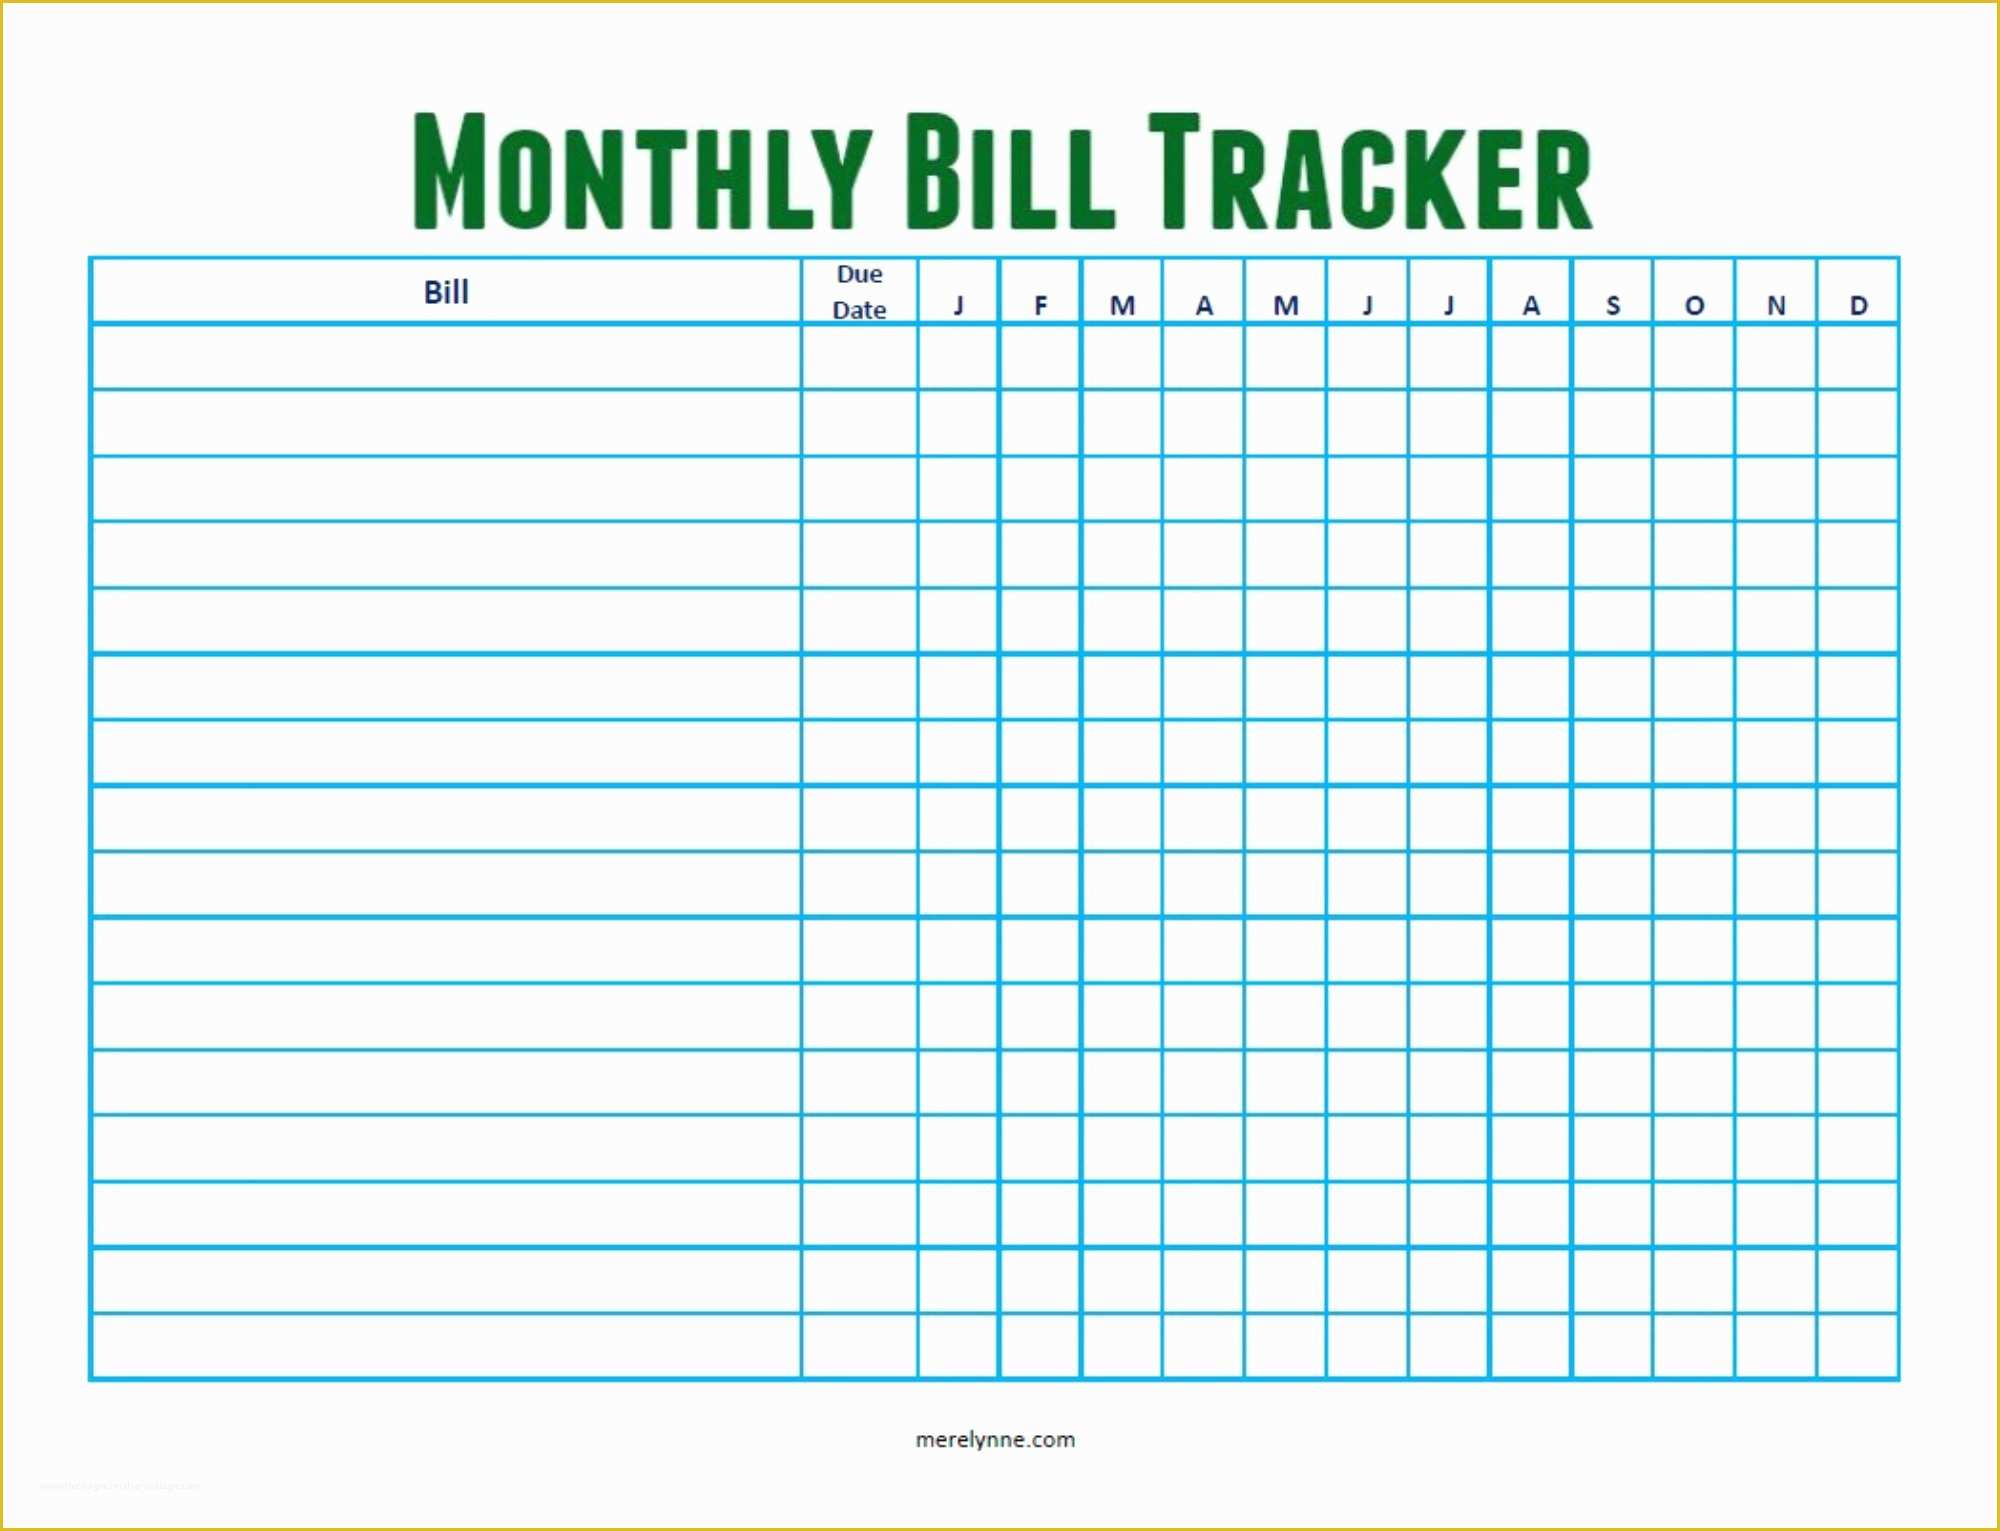 Free Payment Tracker Template Of Monthly Bill Tracker From Merelynne Merelynne by